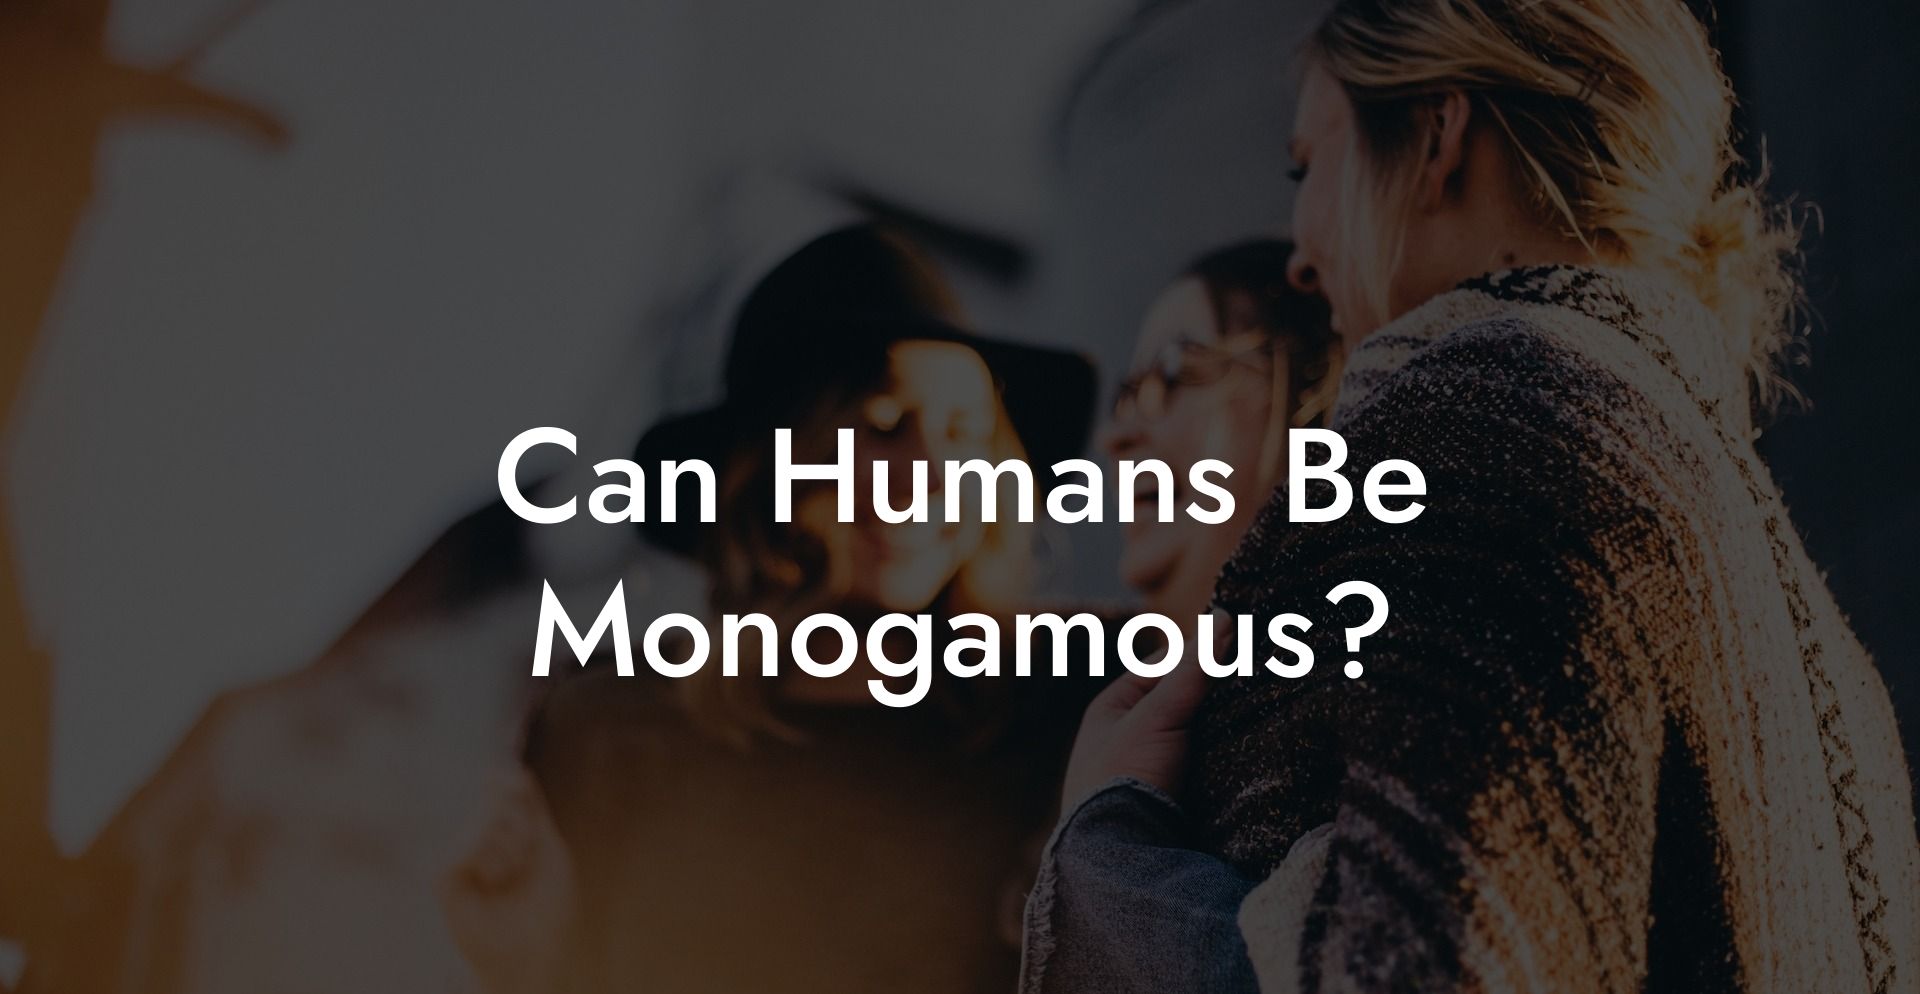 Can Humans Be Monogamous?